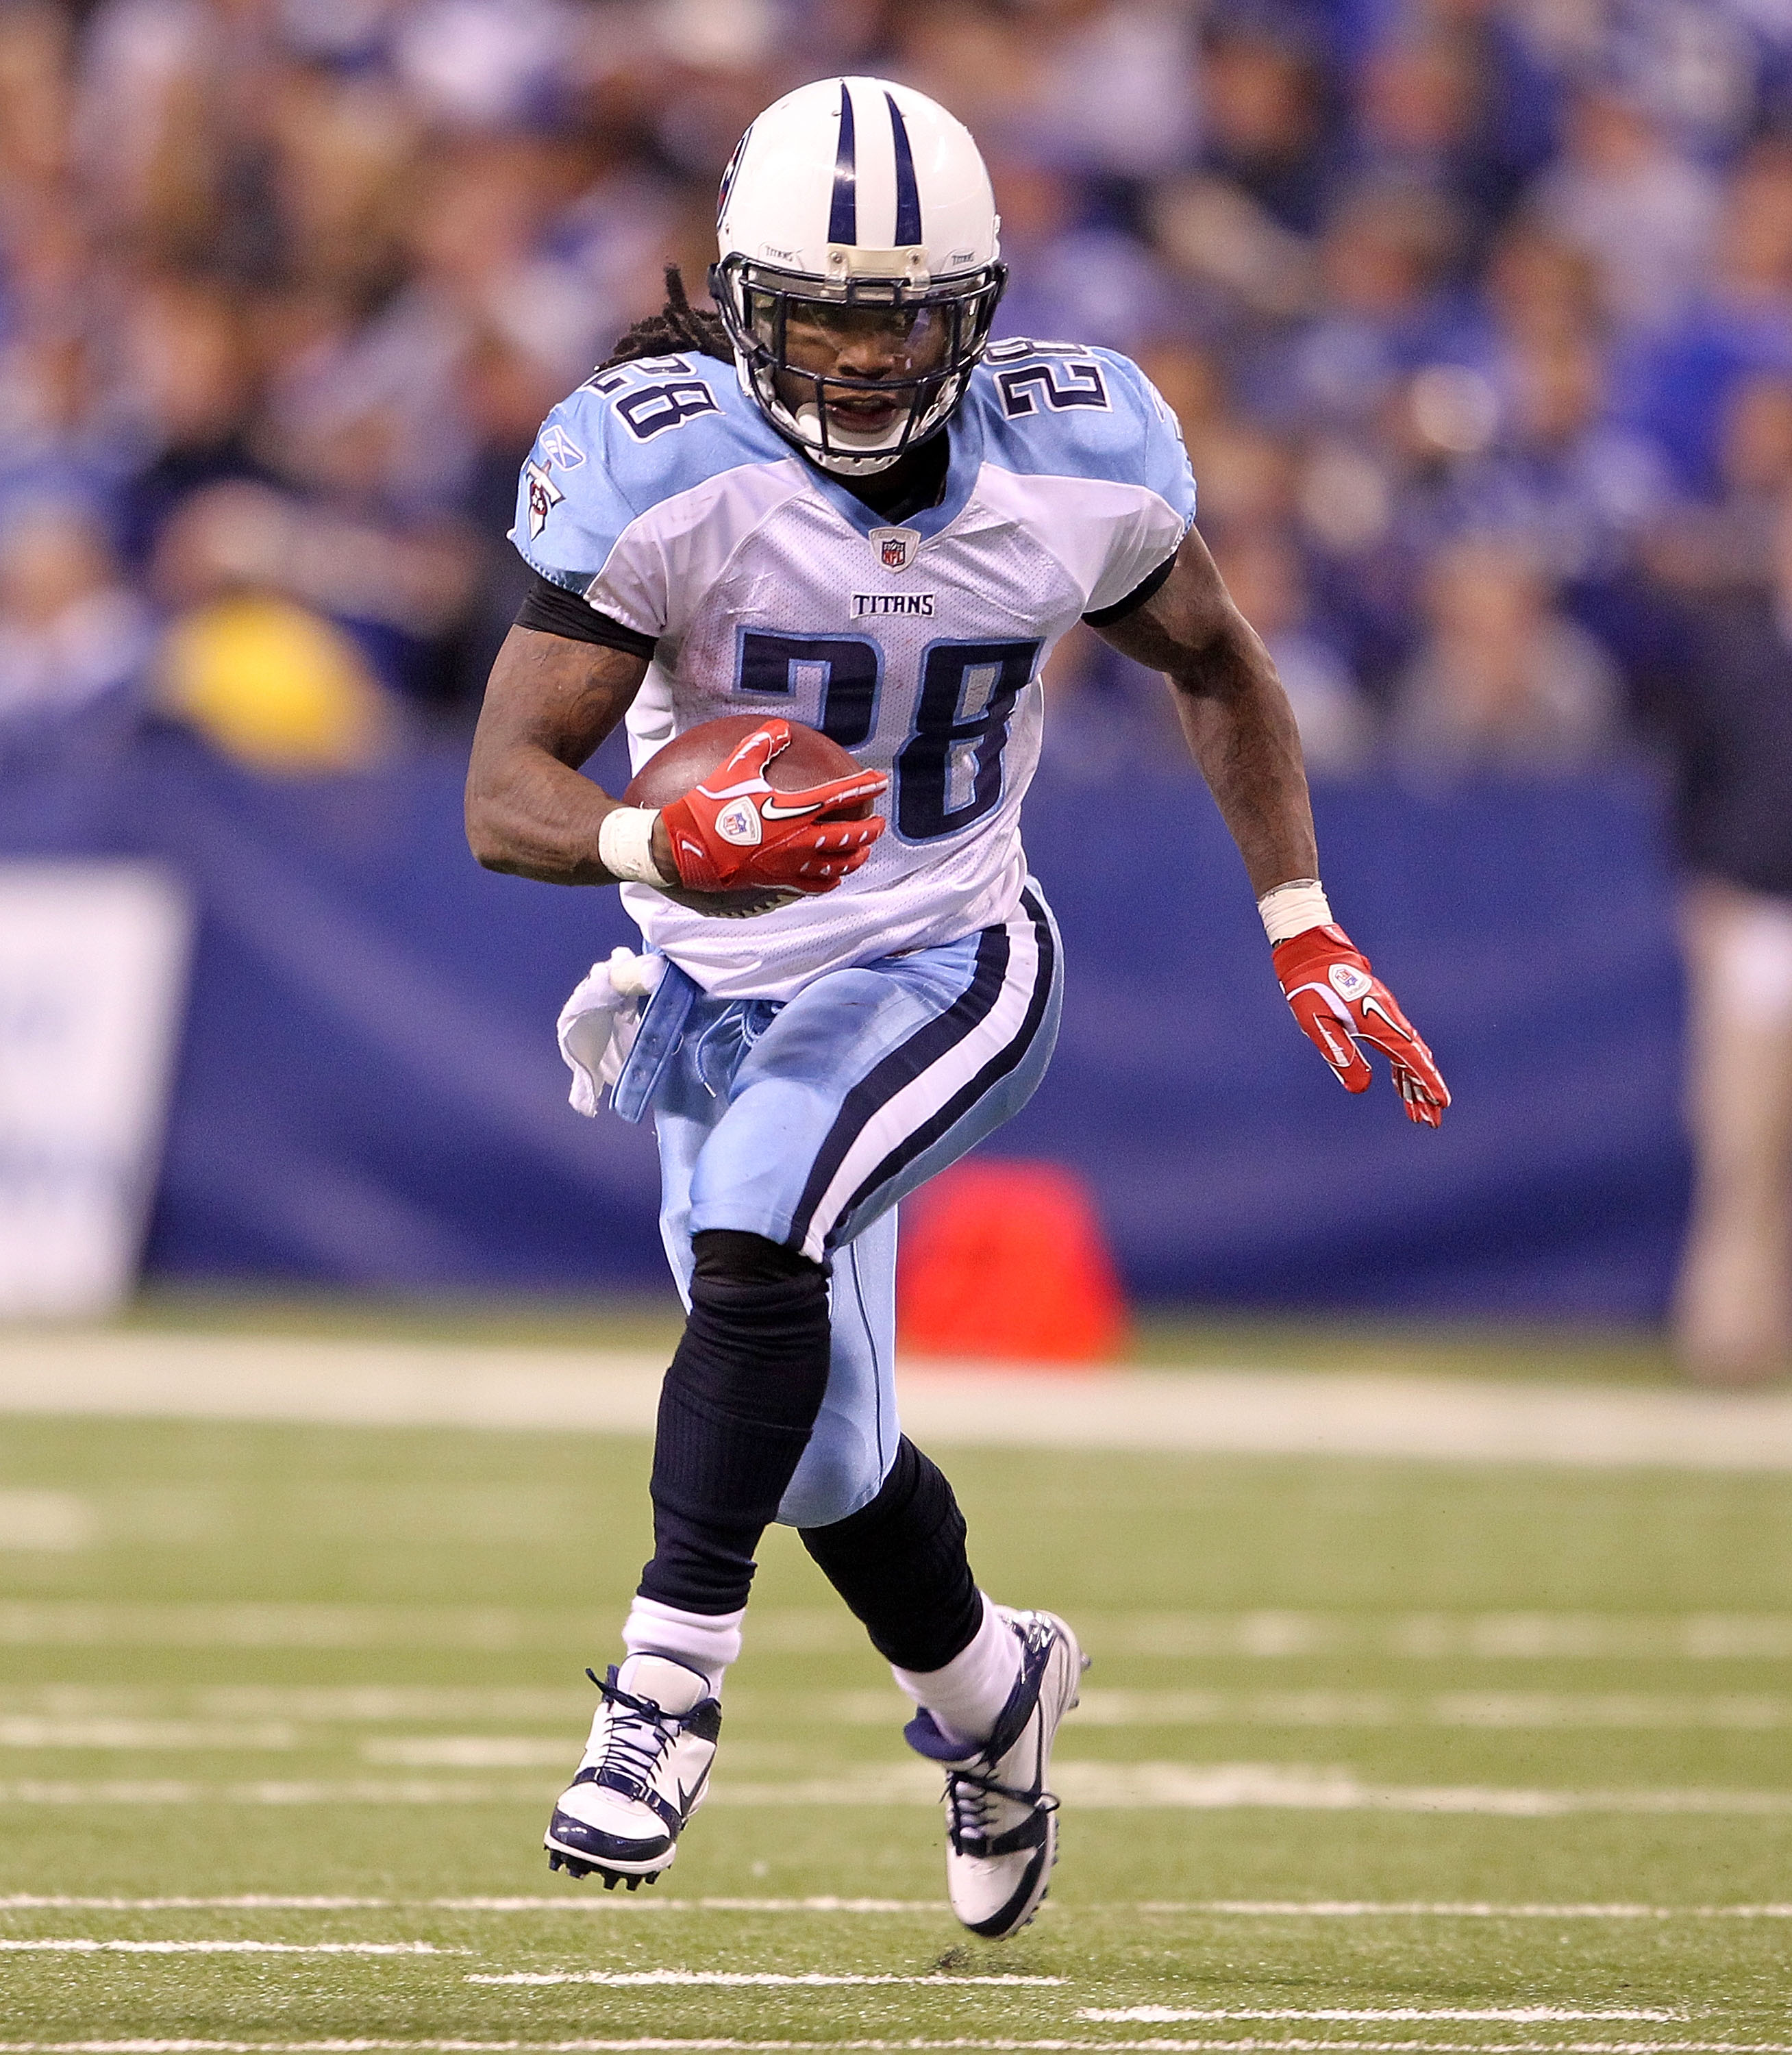 INDIANAPOLIS - JANUARY 02:  Chris Johnson #28 of the Tennessee Titans runs for a touchdown during NFL game against the Indianapolis Colts at Lucas Oil Stadium on January 2, 2011 in Indianapolis, Indiana.  (Photo by Andy Lyons/Getty Images)